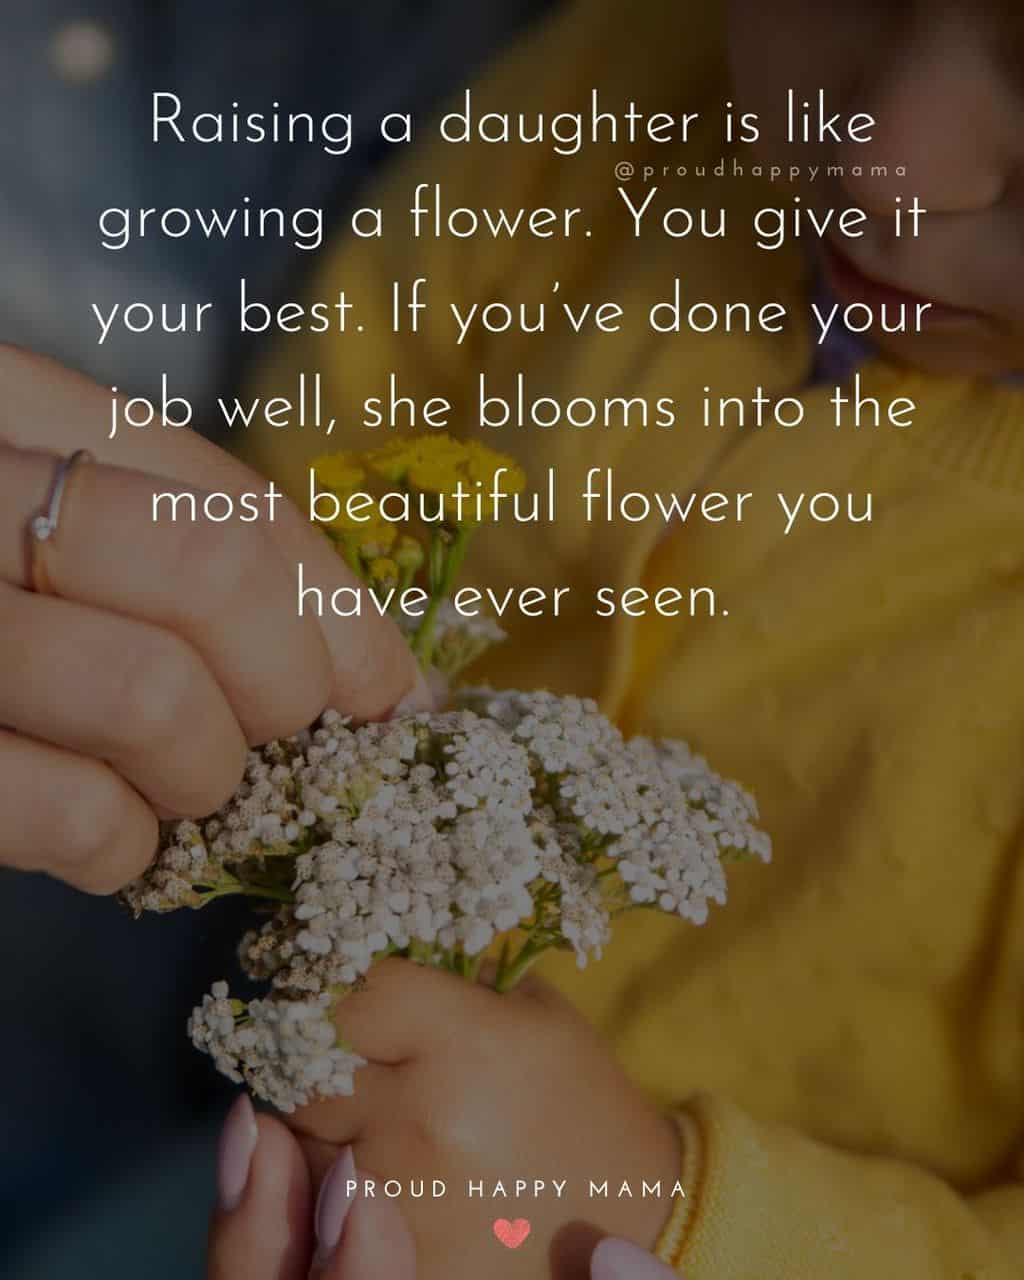 daughters are blessings quotes - ‘Raising a daughter is like growing a flower. You give it your best. If you’ve done your job well, she blooms into the